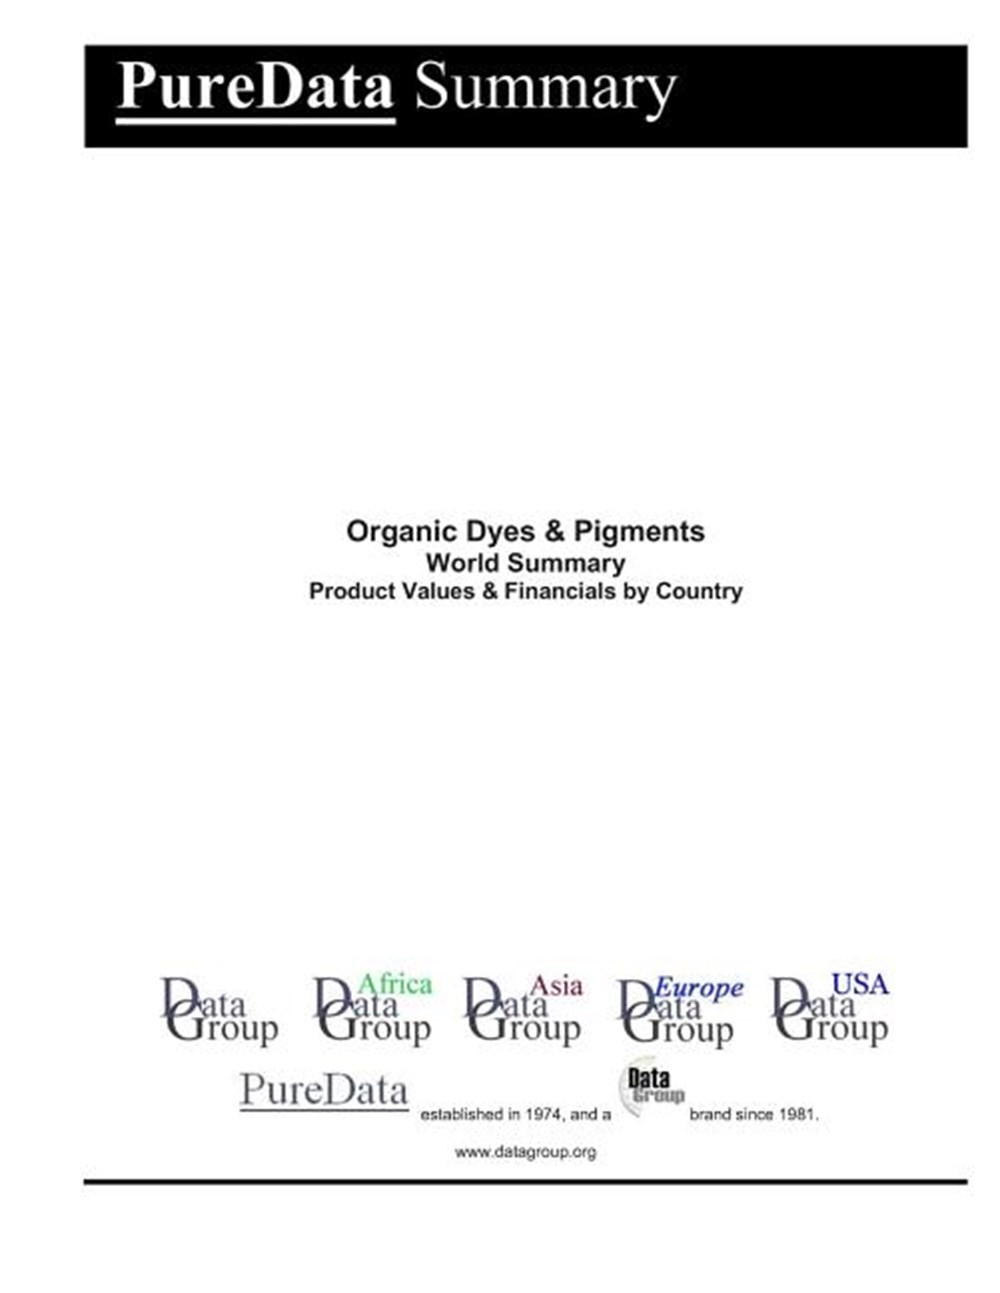 Organic Dyes & Pigments World Summary Product Values & Financials by Country